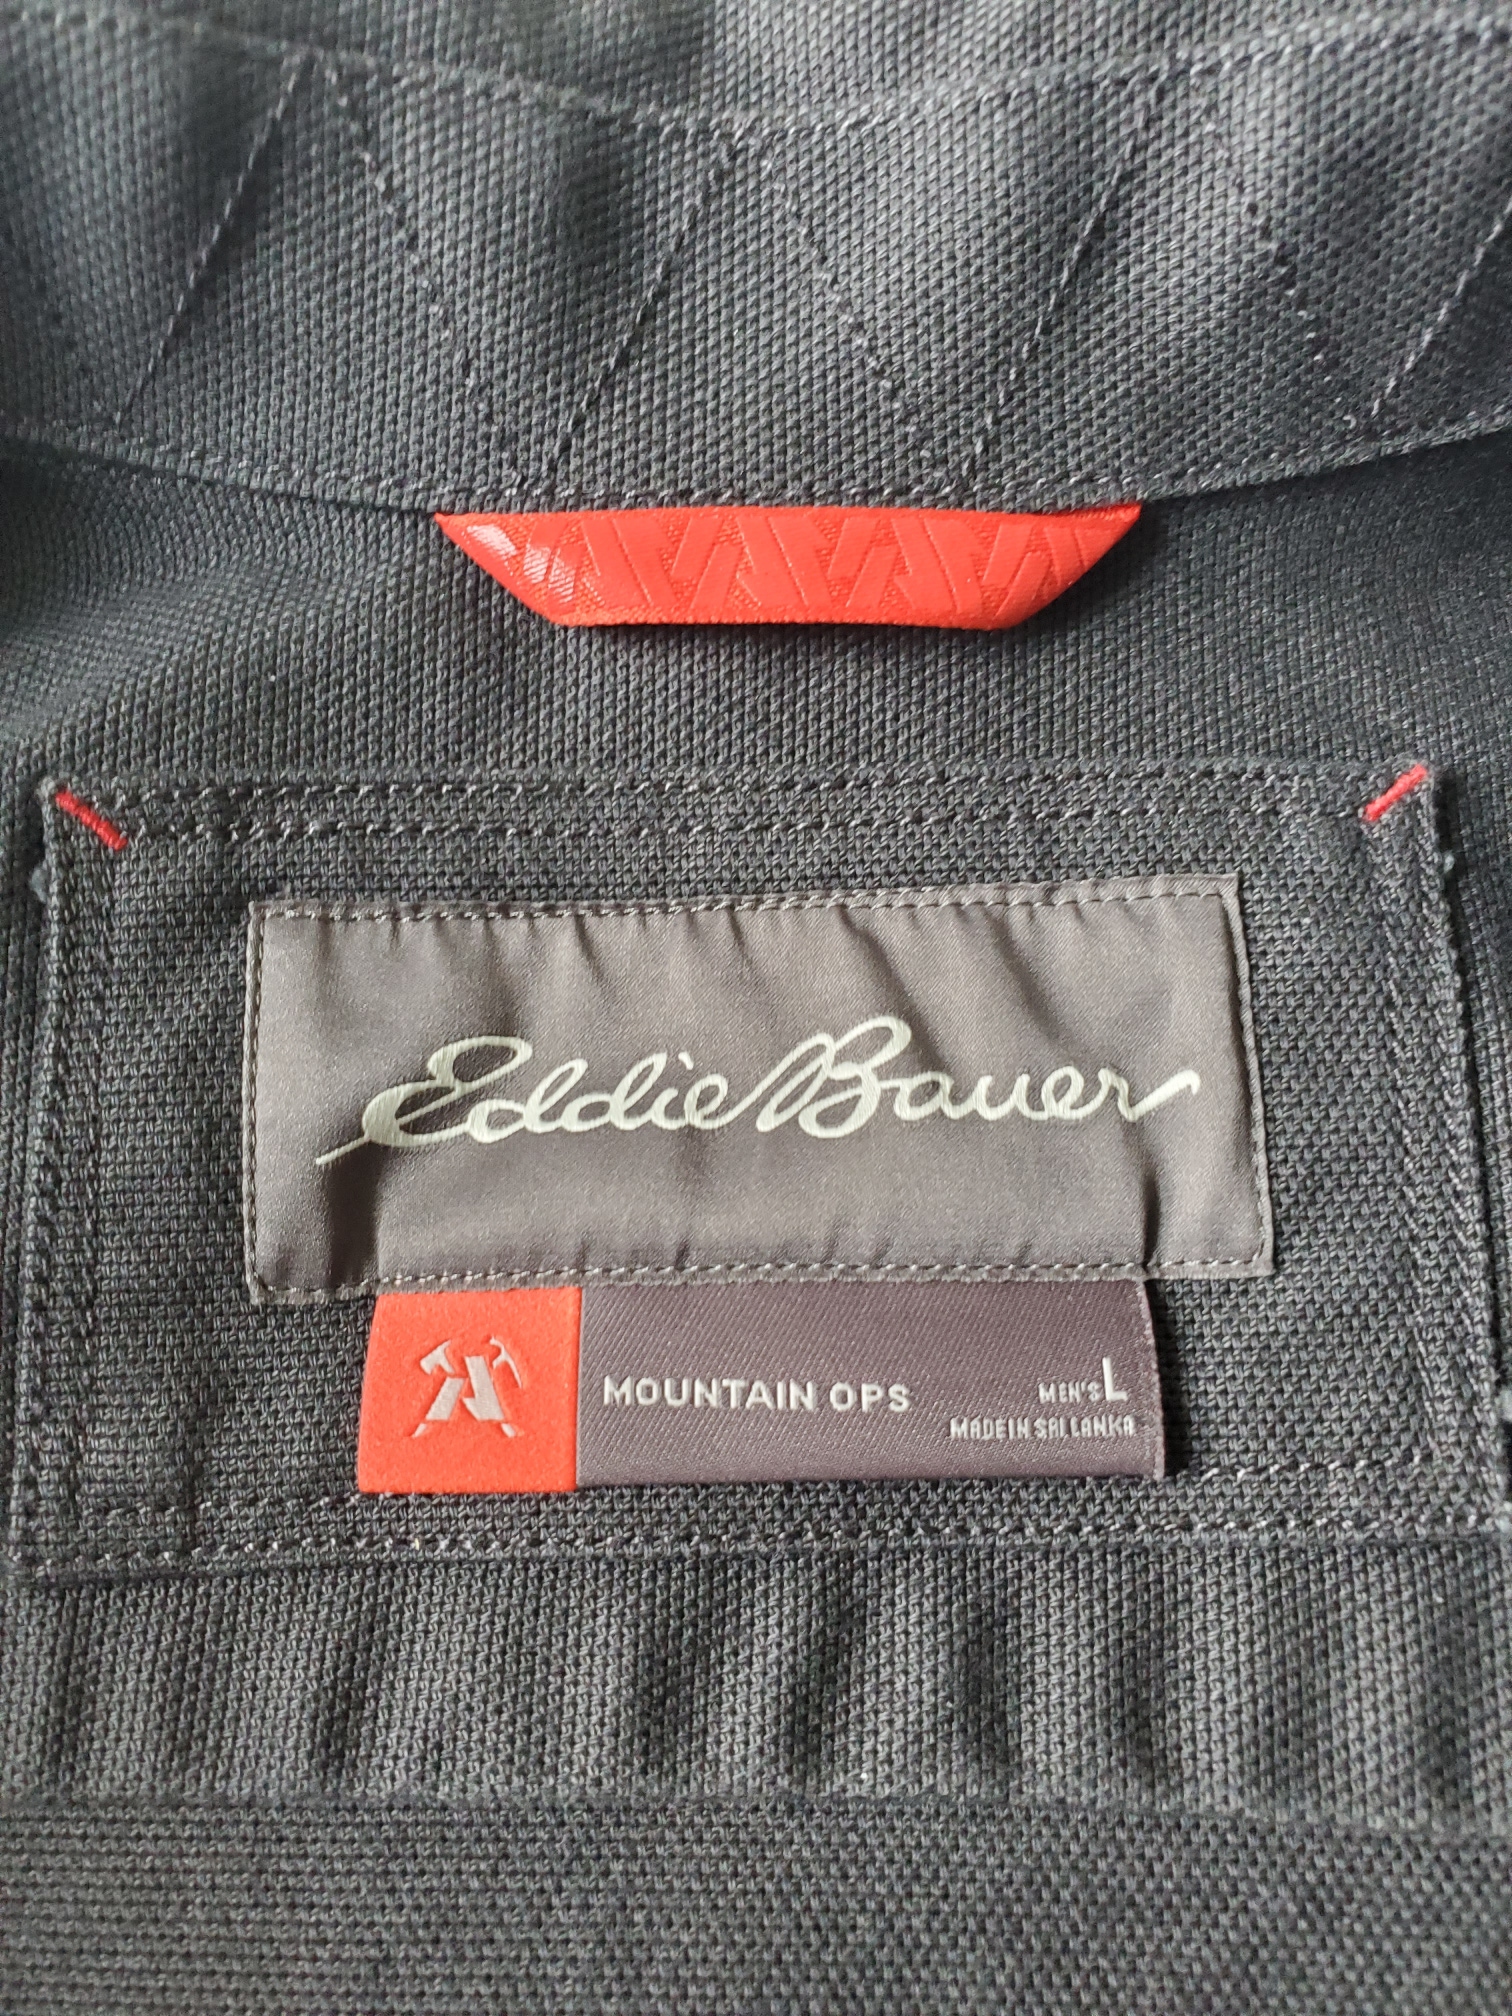 Eddie Bauer Jackets & Coats | Used and New on SidelineSwap